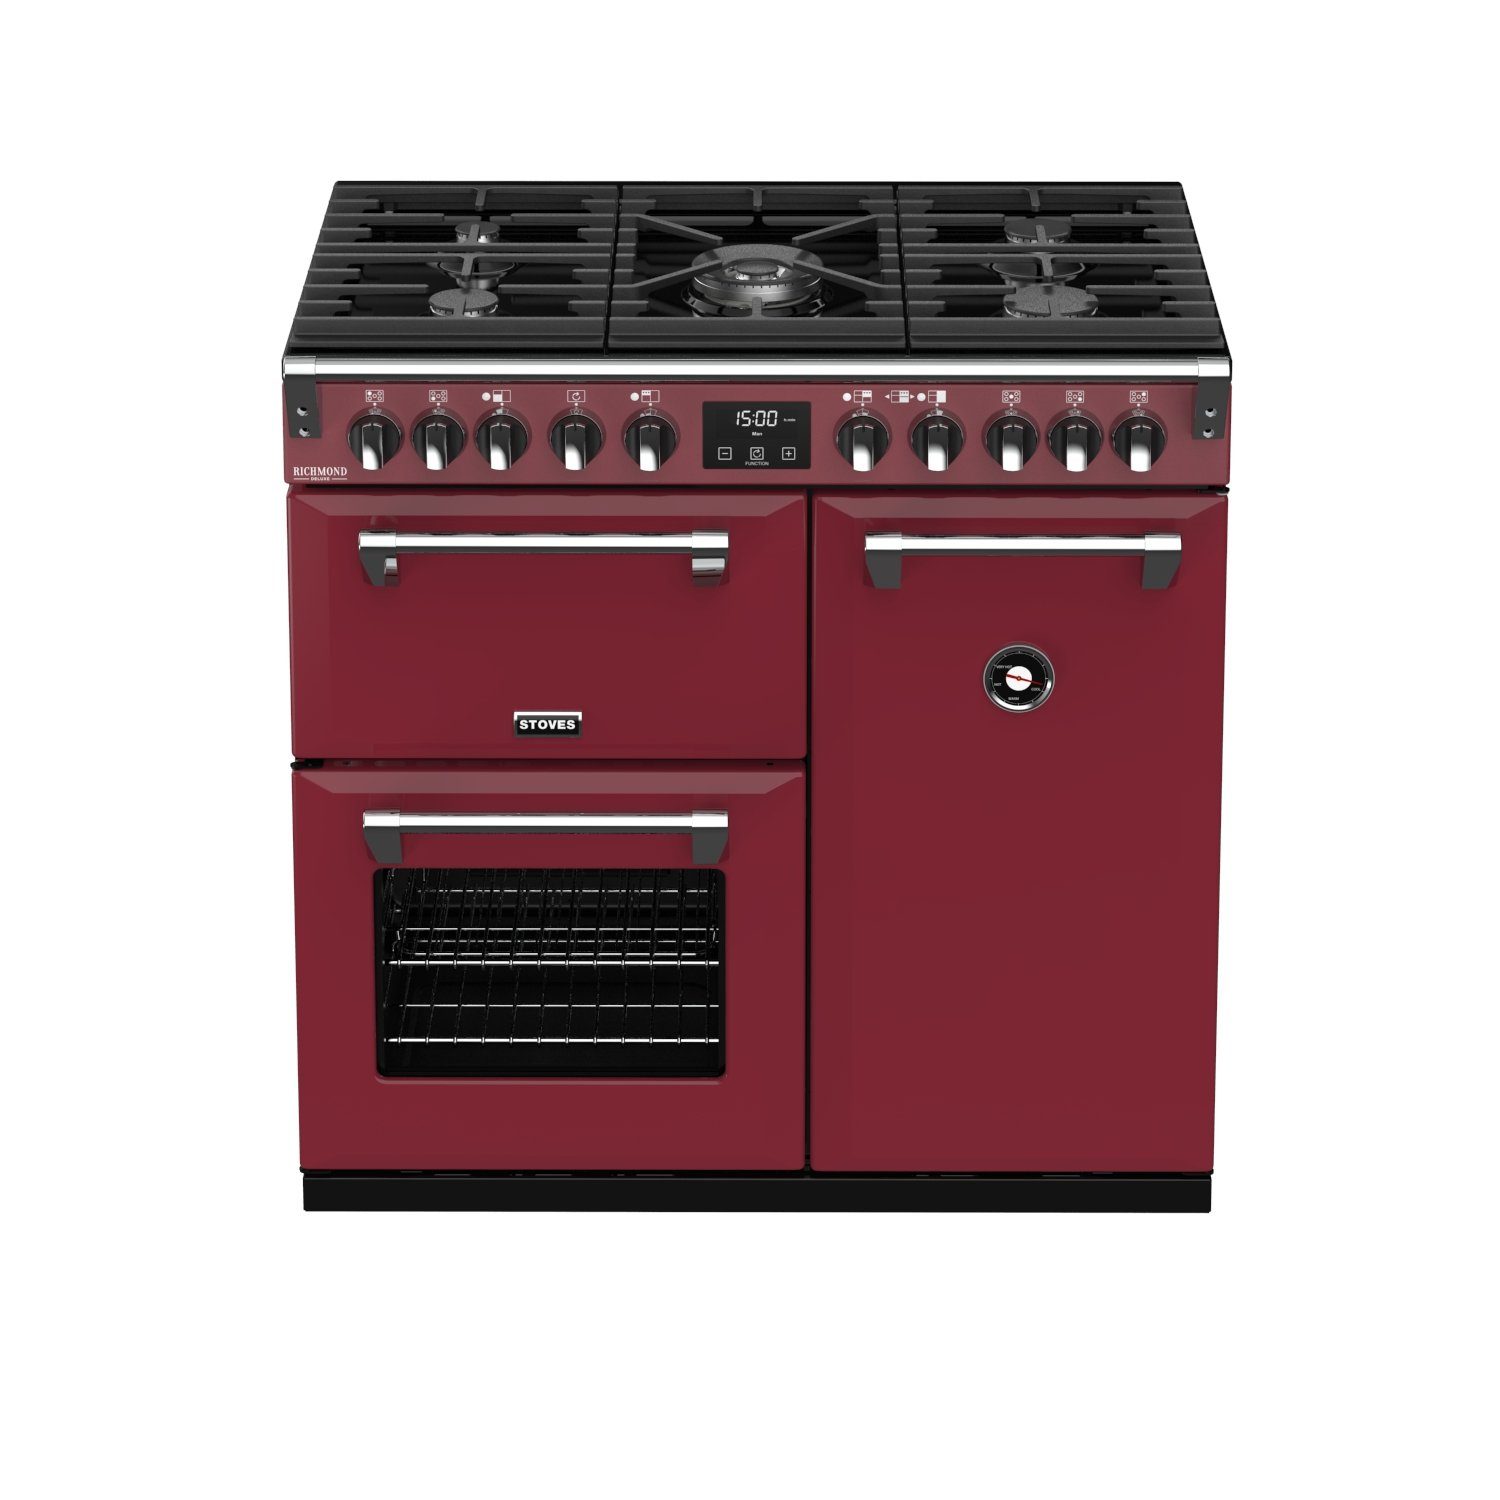 Red/Chrom CB S900 GAS Deluxe RICHMOND DF Gas-Standherd Chili STOVES STOVES